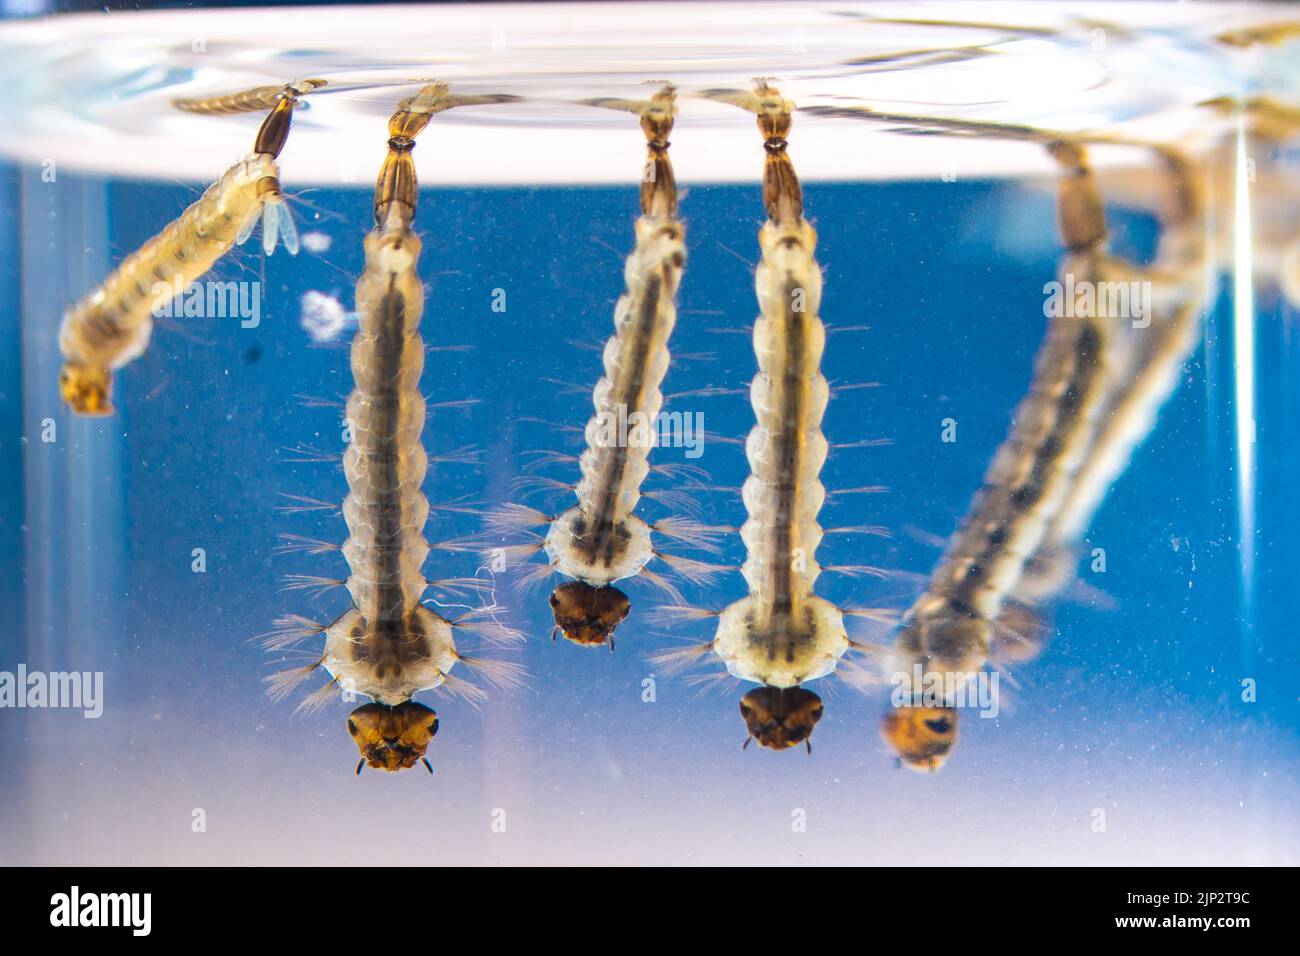 Asian tiger mosquito larvae in water alive, Aedes albopictus. Exotic species, invasive mosquito. Aedes. Macrophotography, close-up. Larval stages. Stock Photo